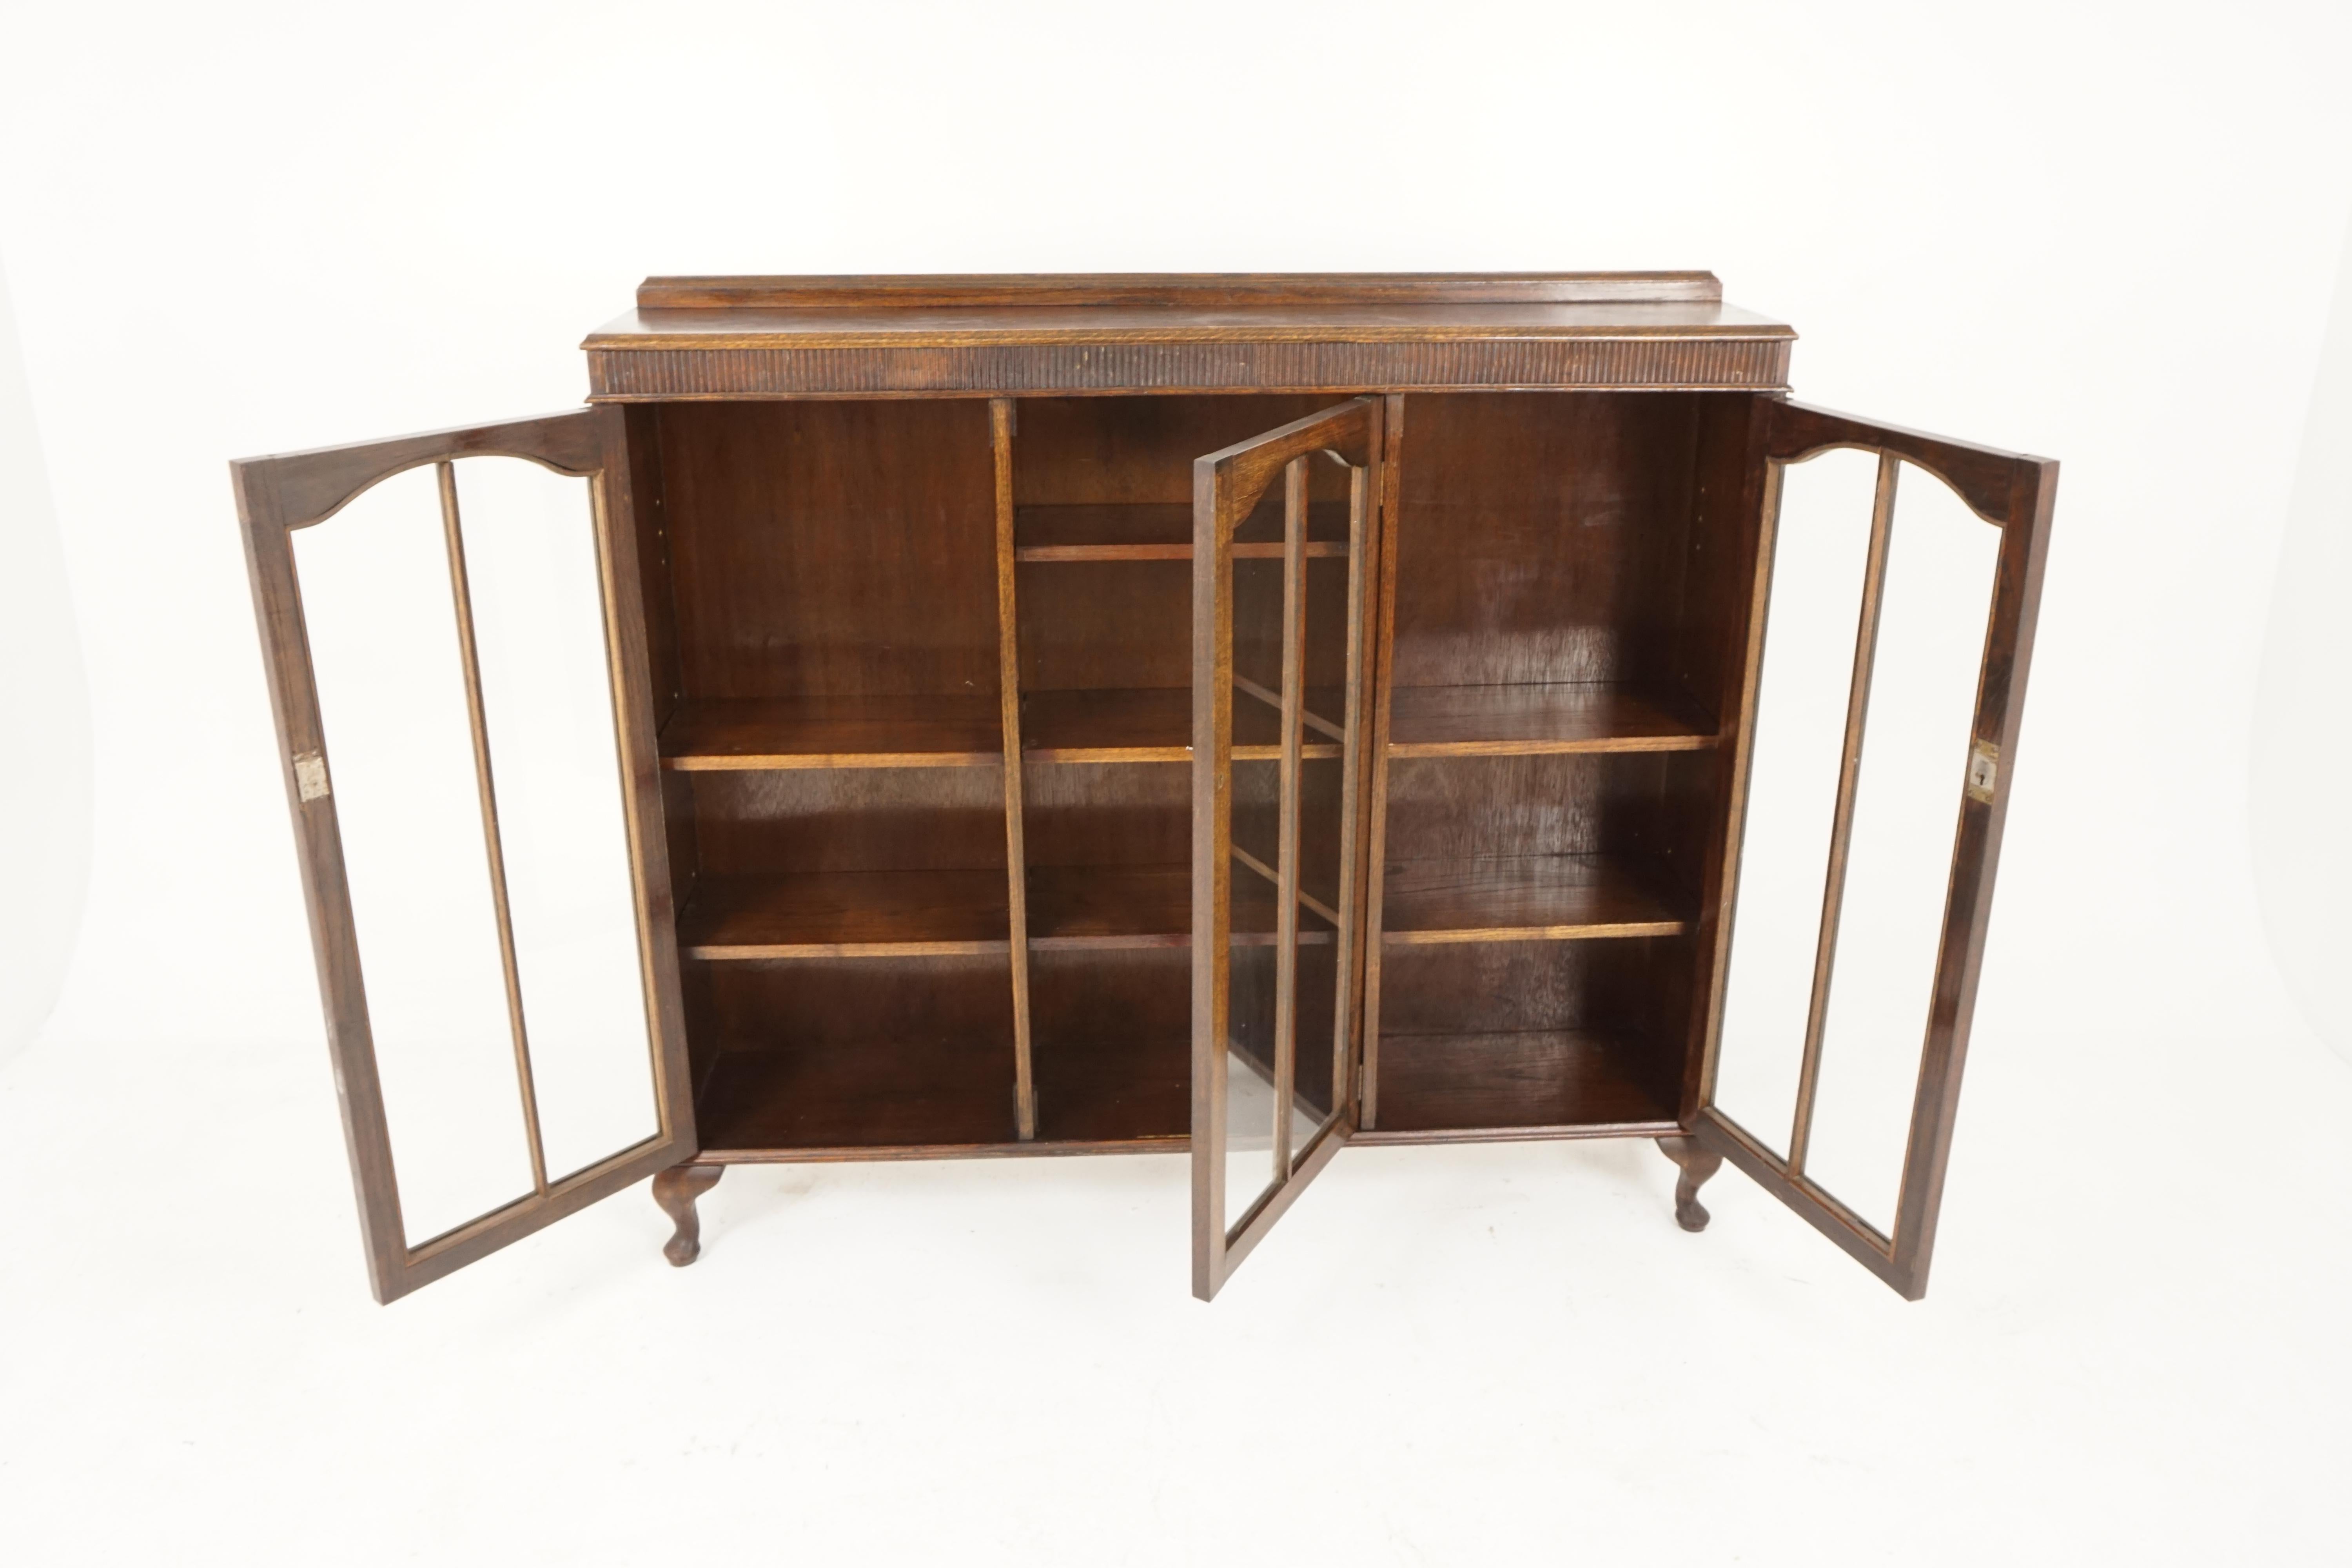 Vintage oak three-door bookcase, display cabinet, Scotland 1930, B2236

Scotland, 1930
Solid oak
Original finish
Pediment top on rectangular moulded top,
Three dome shaped doors underneath
Opens to reveal pair of adjustable shelves to the